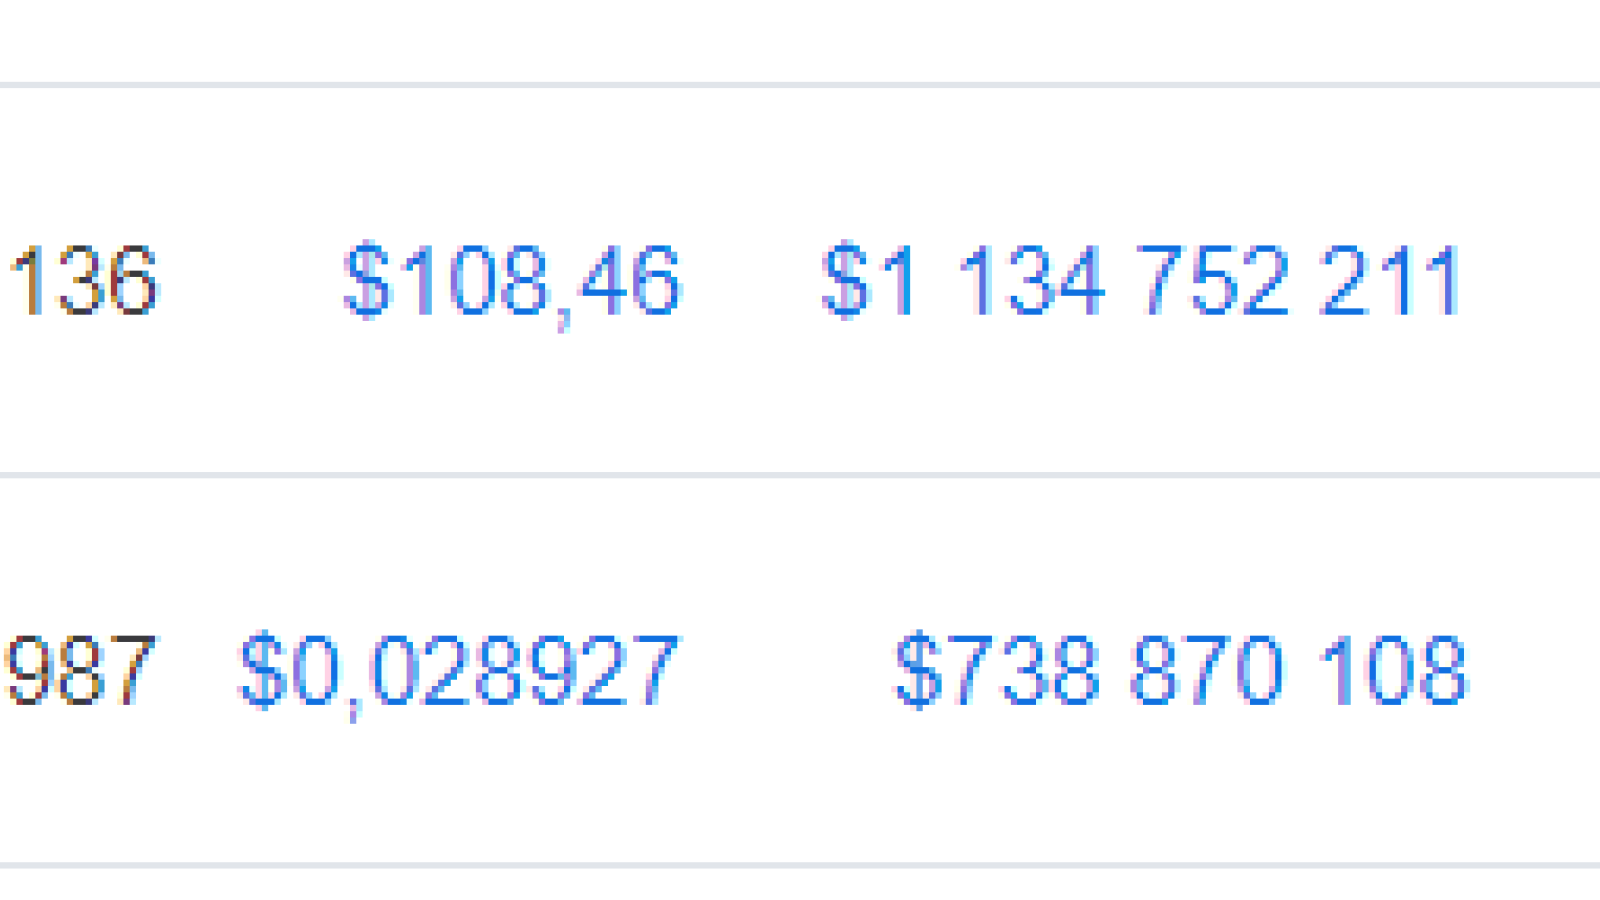 Bitcoin SV is going for $108.46, position #11